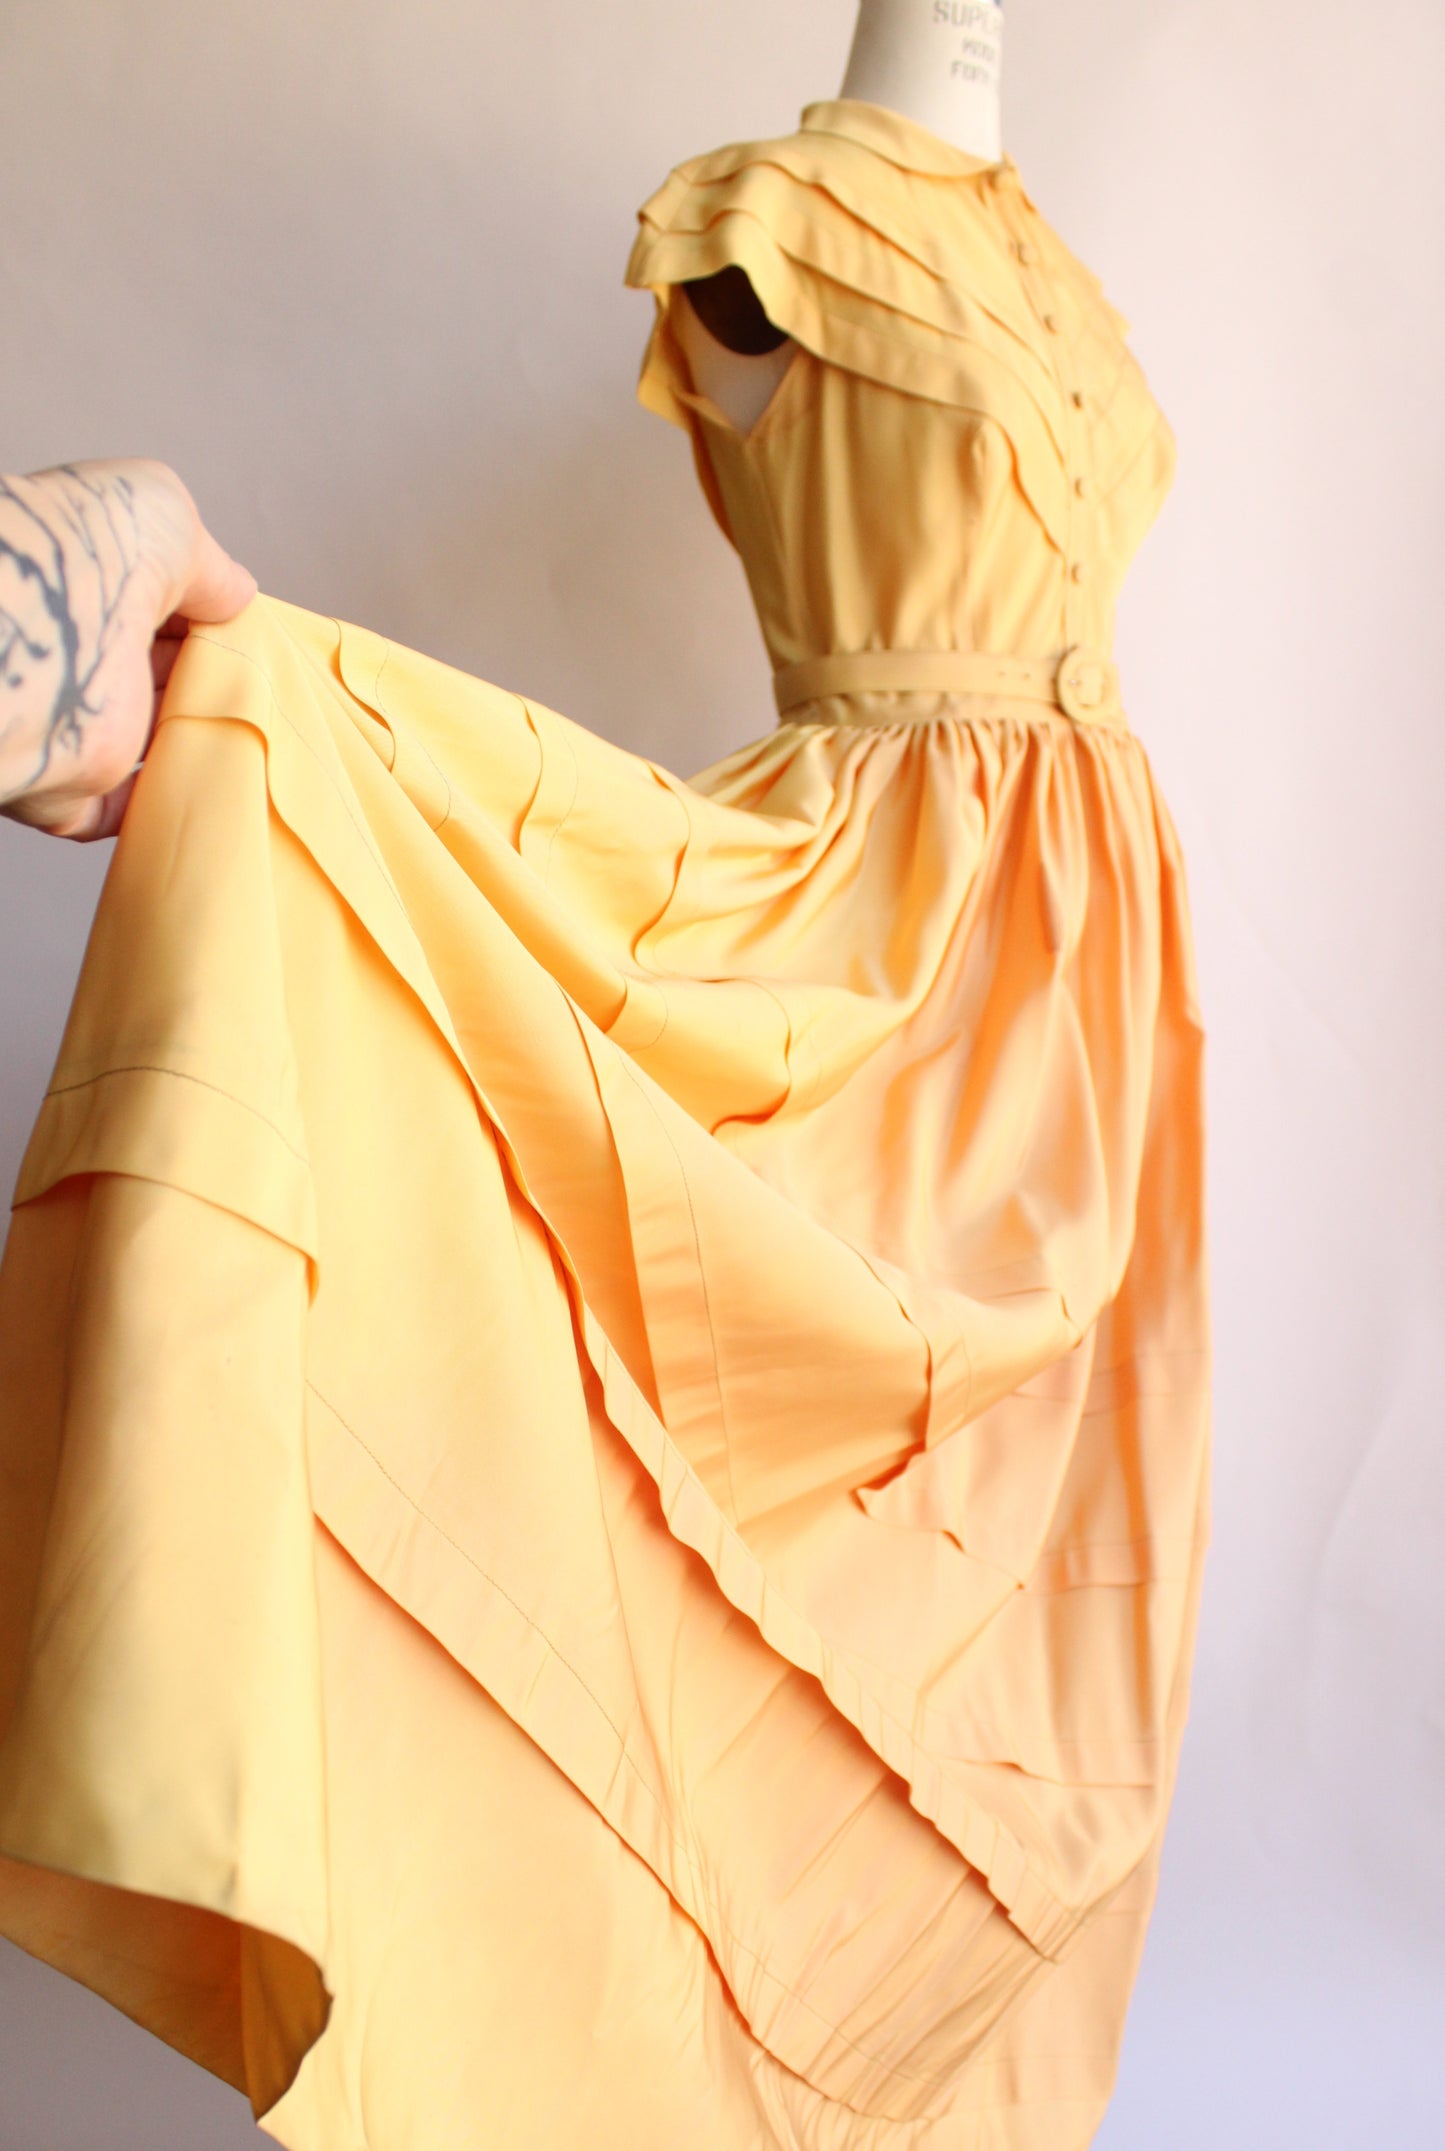 Vintage 1940s Full Length Yellow Gown with Gloves